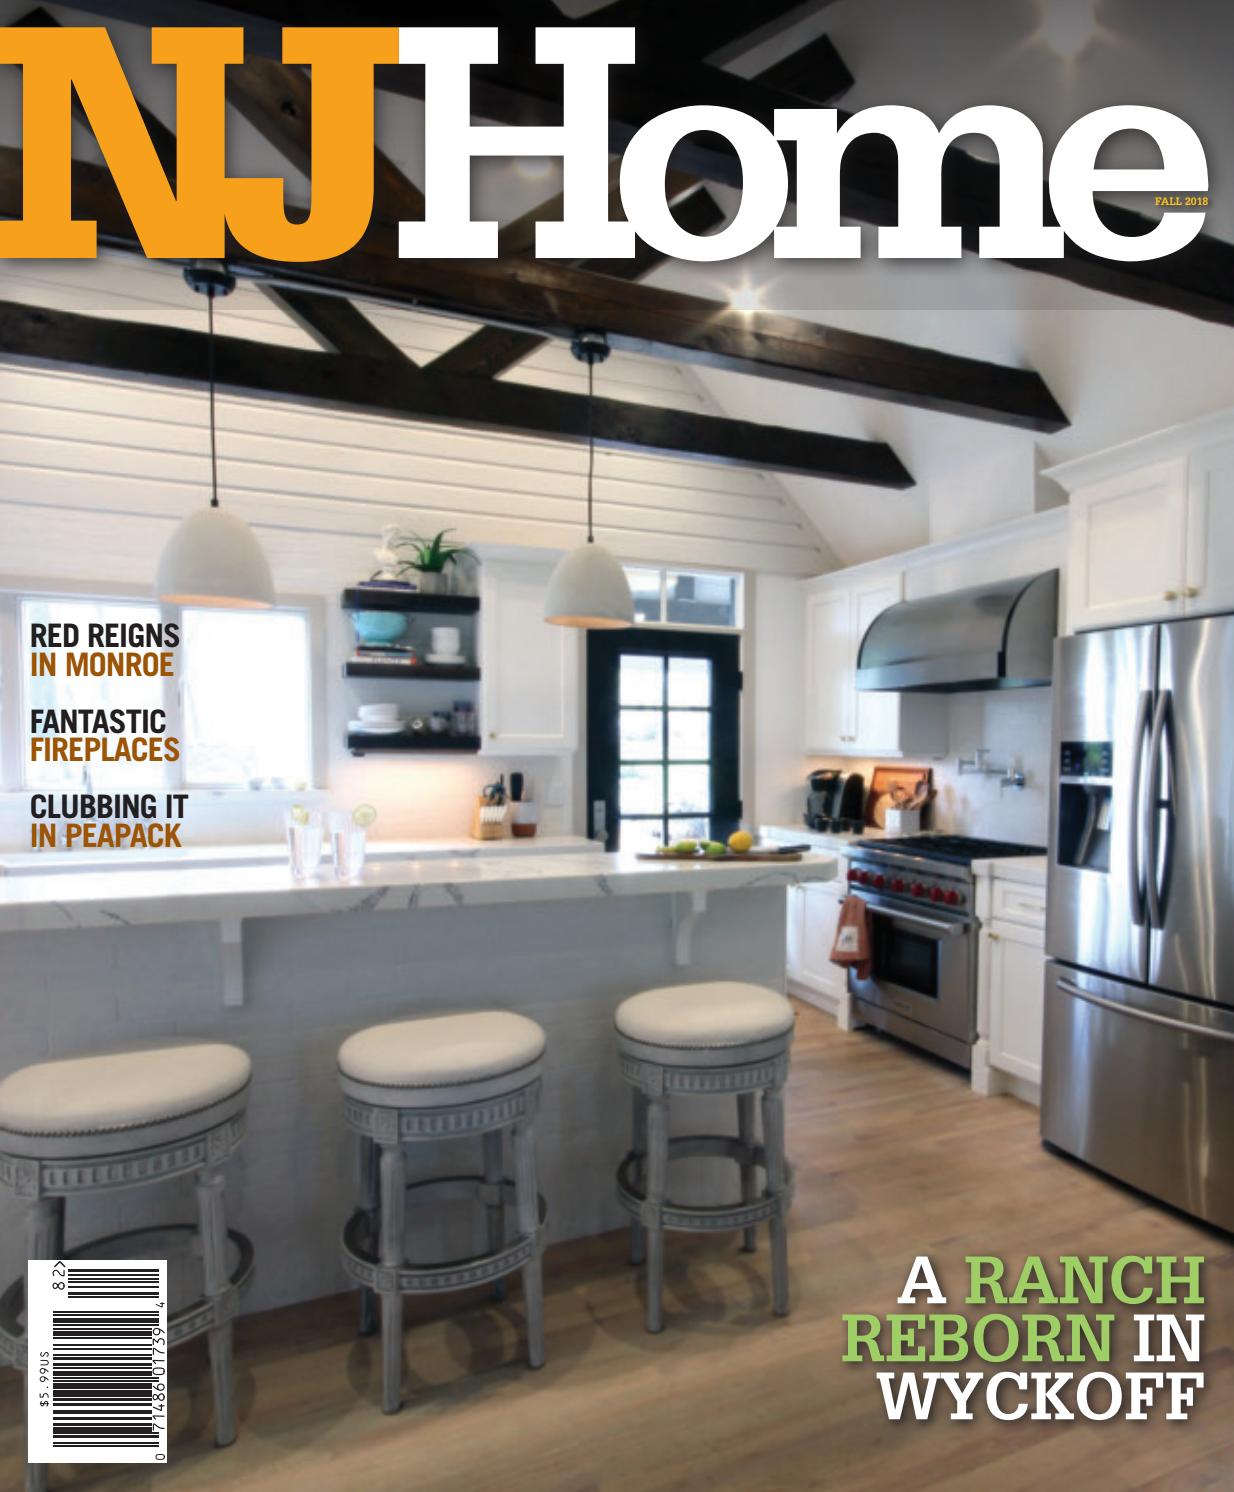 Raymour and Flanigan Electric Fireplaces Beautiful Nj Home Fall 2018 by Wainscot Media issuu